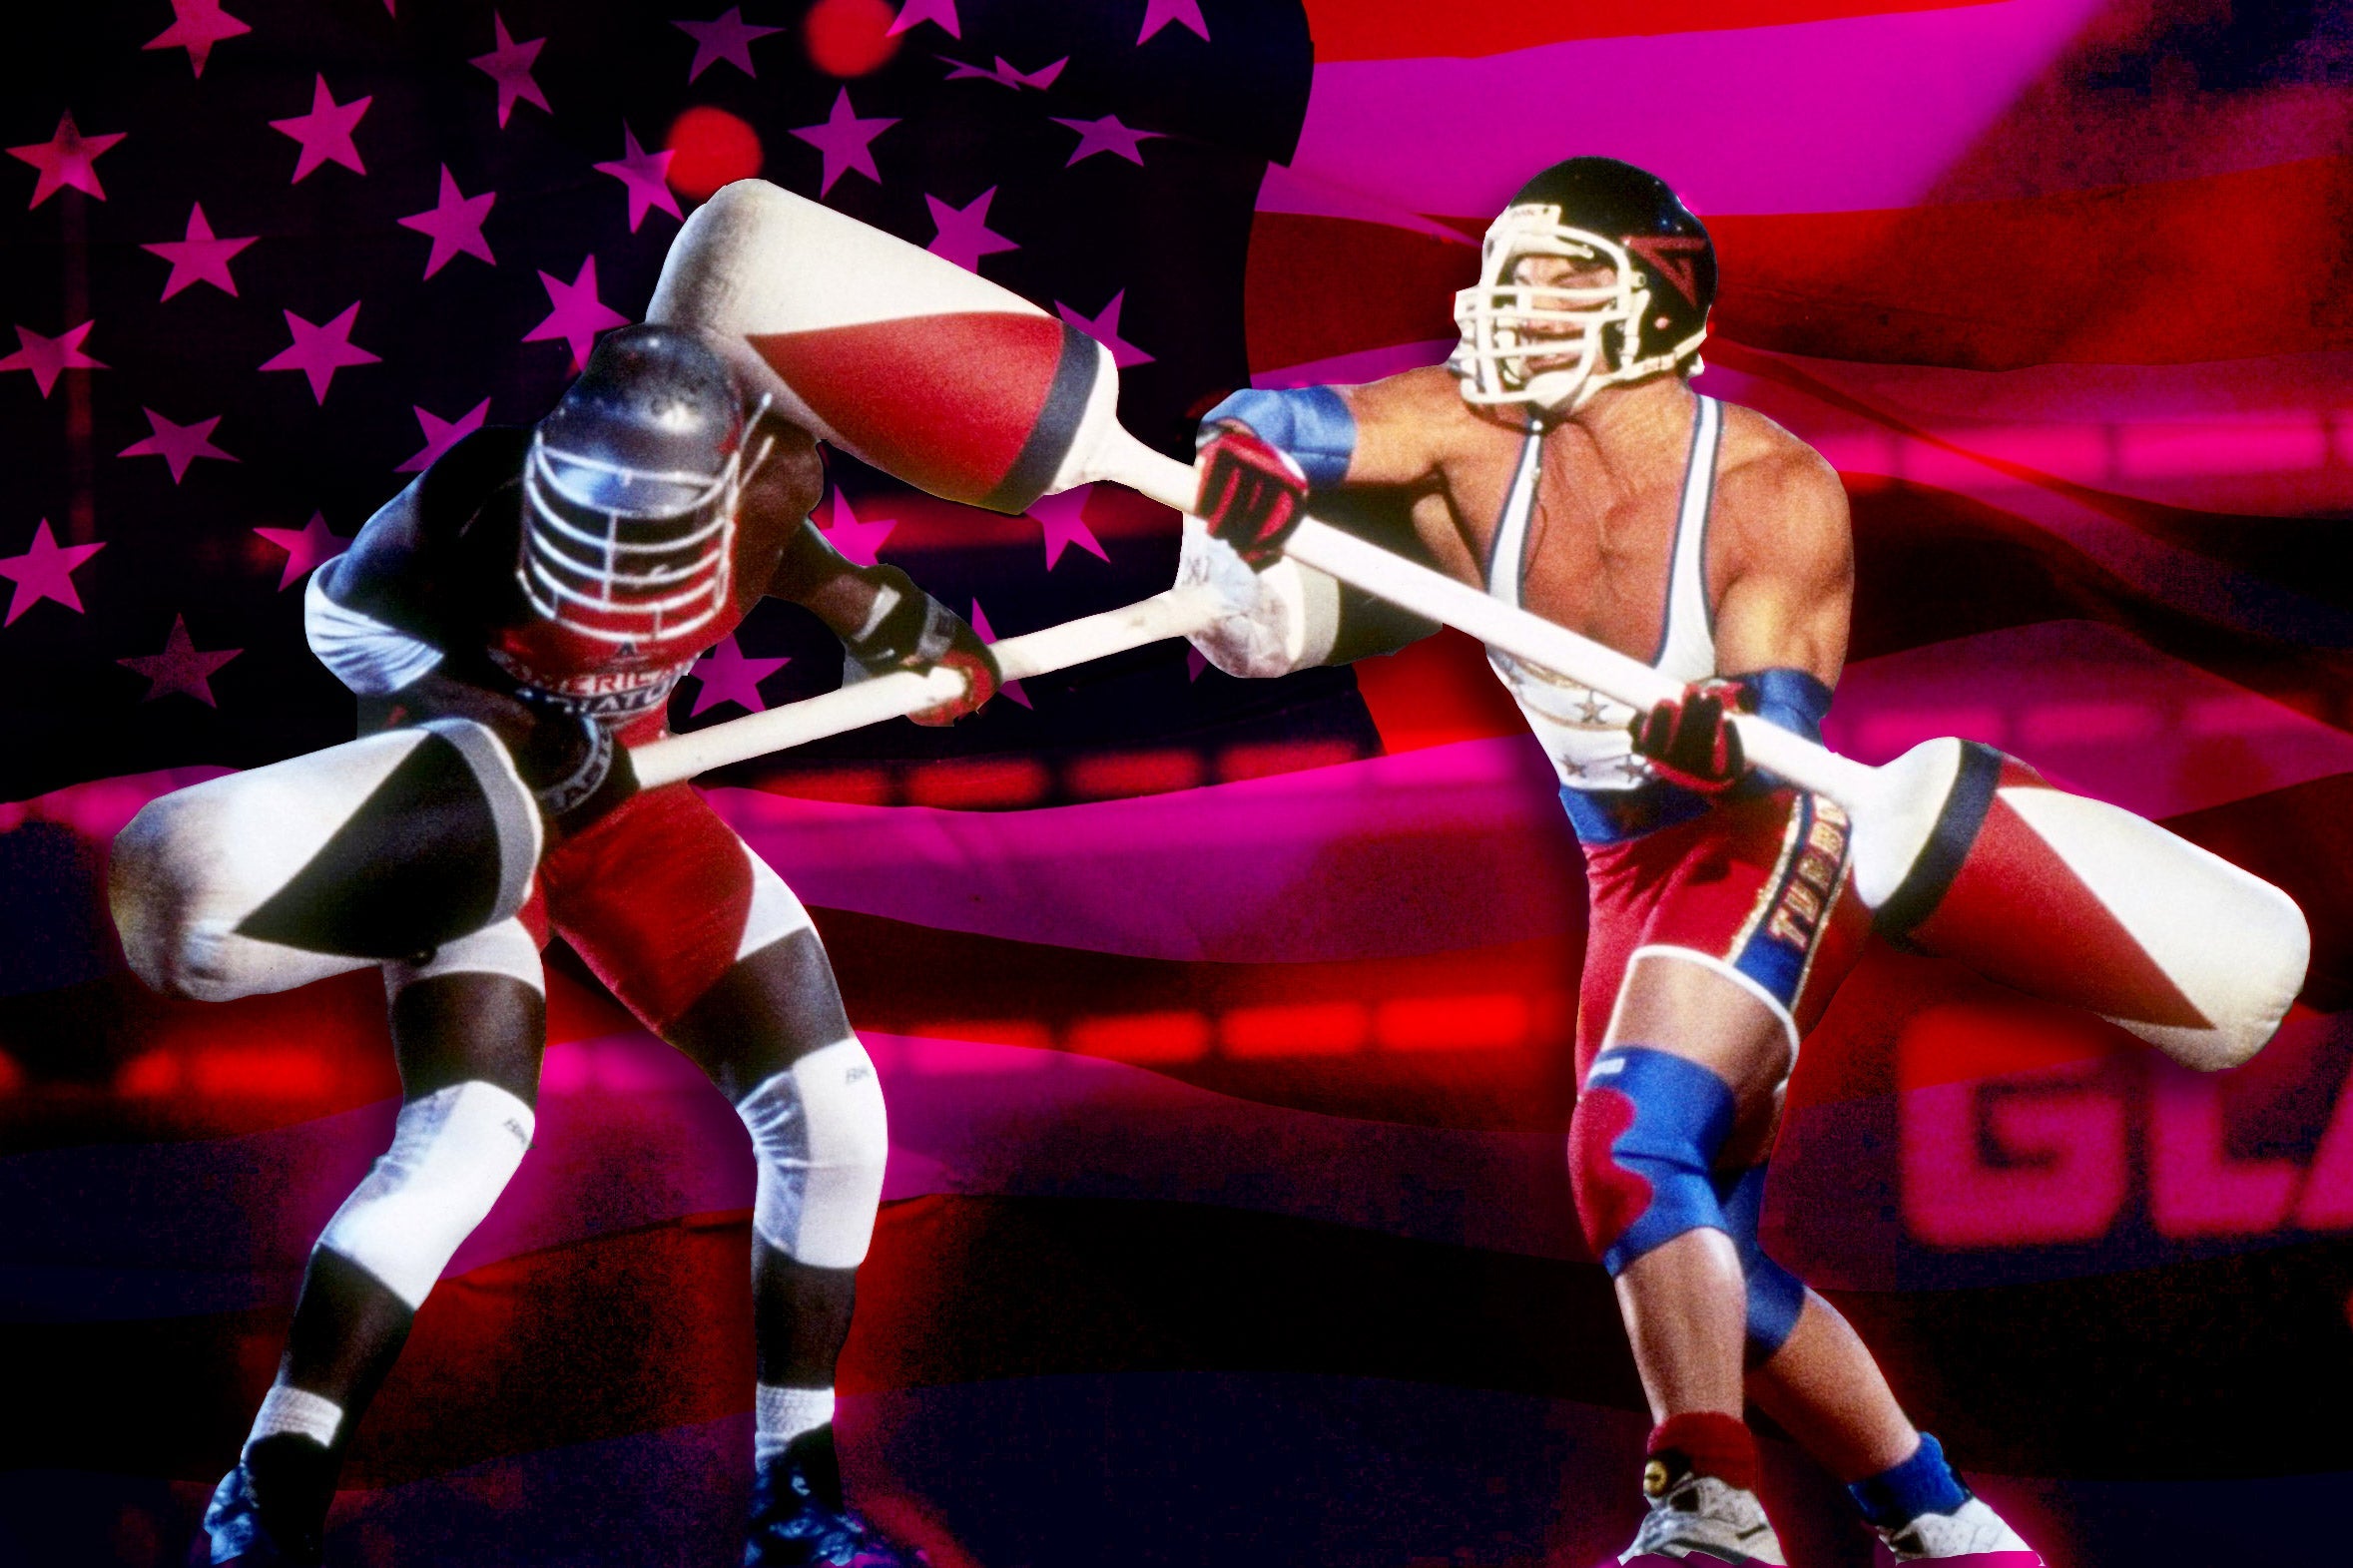 An American Gladiator fighting a contestant in the Joust competition.